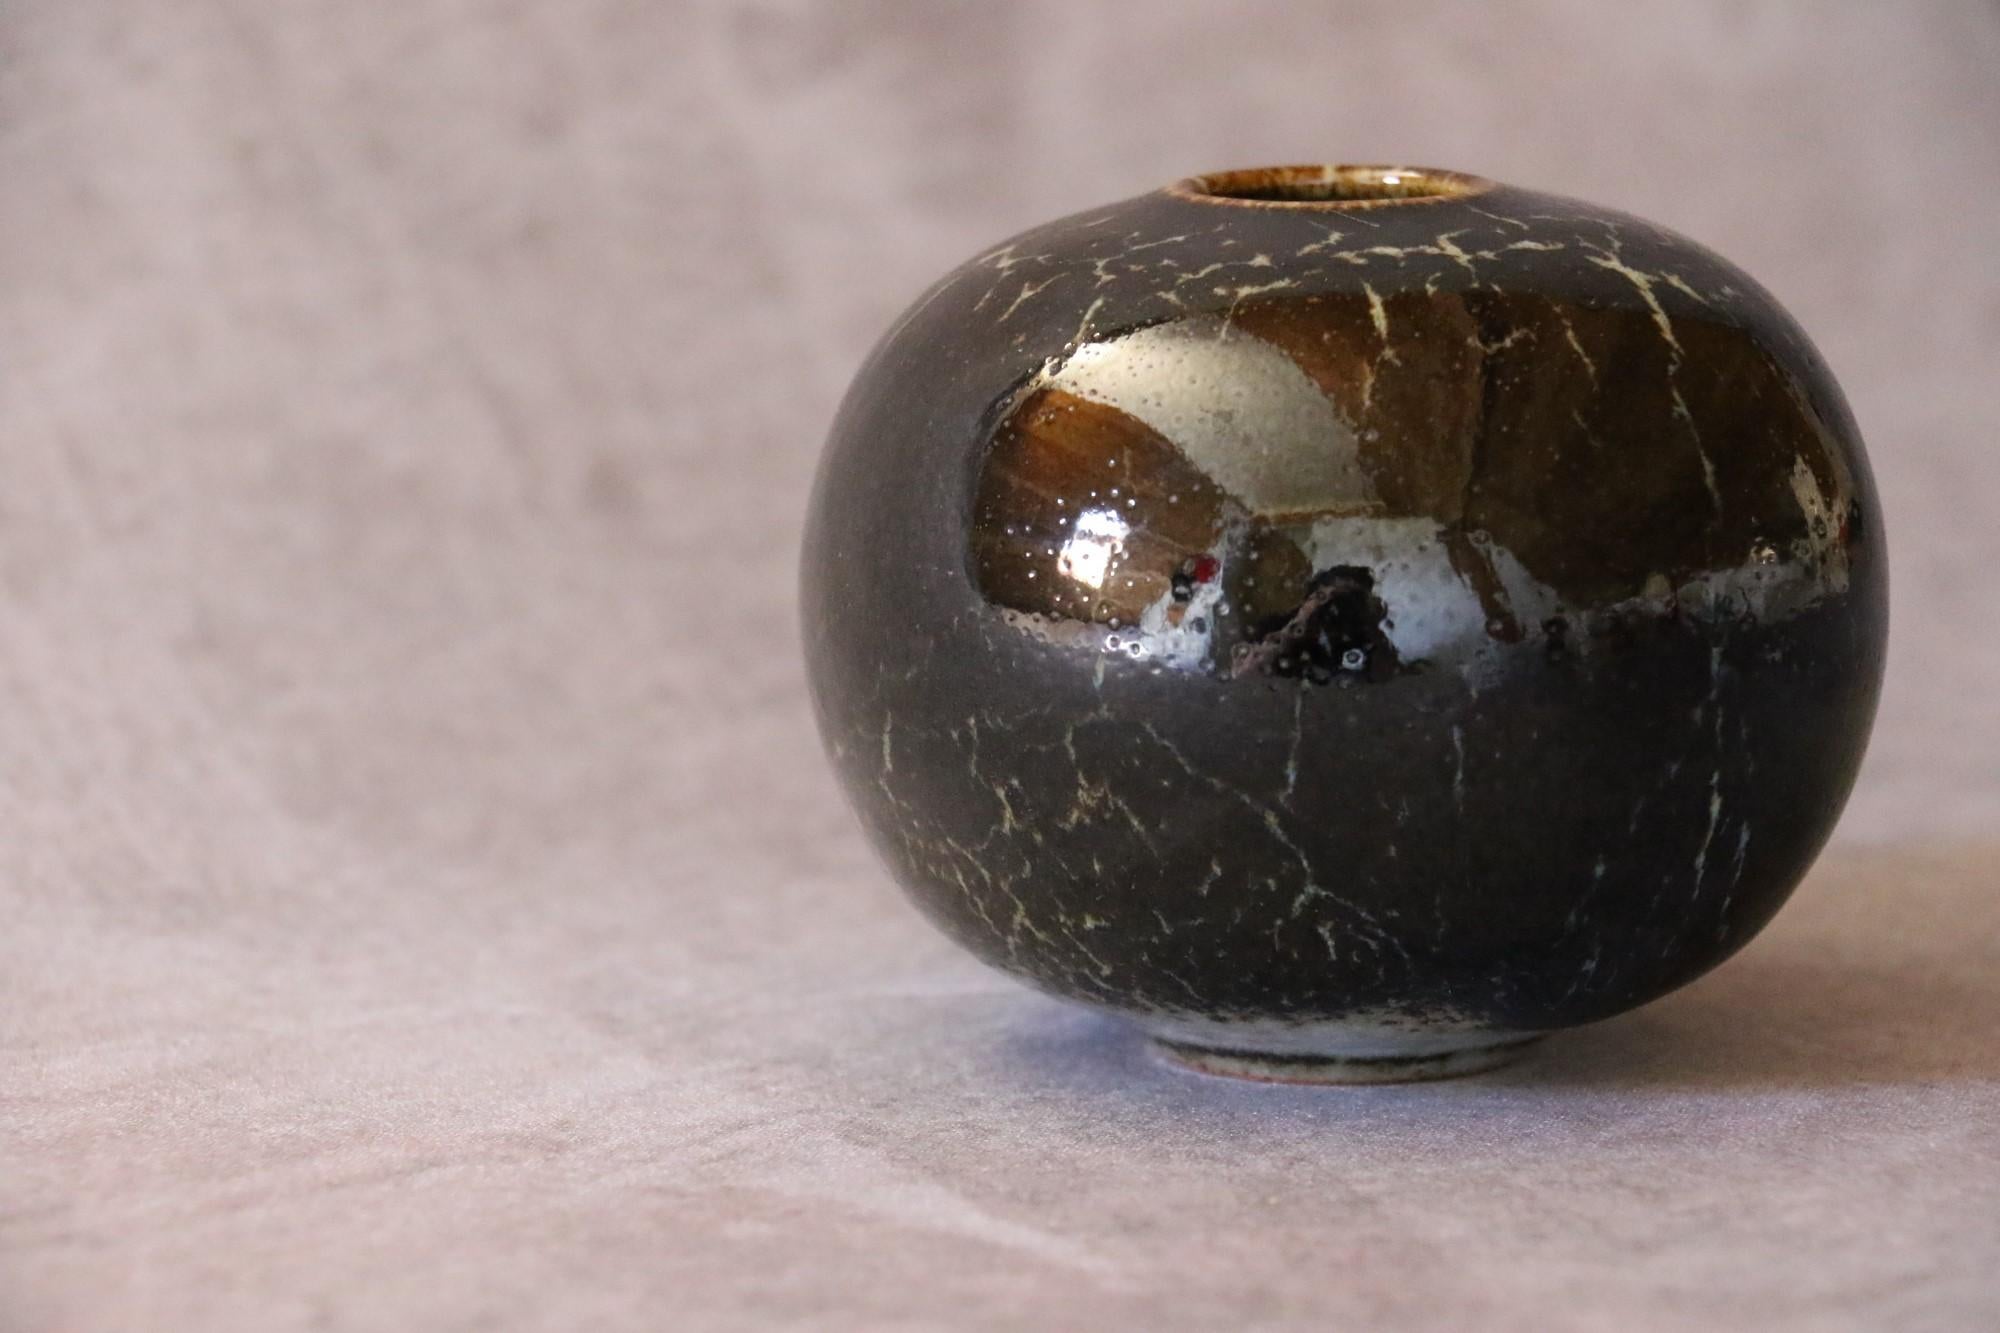 French ceramic ball vase by Marc Uzan - circa 2000
Delicate enamelling in black and white tones - Ring neck
Signed under the base
Very good condition

--------------------------
Born in Sousse, Tunisia in 1955, Marc Uzan discovered modelling